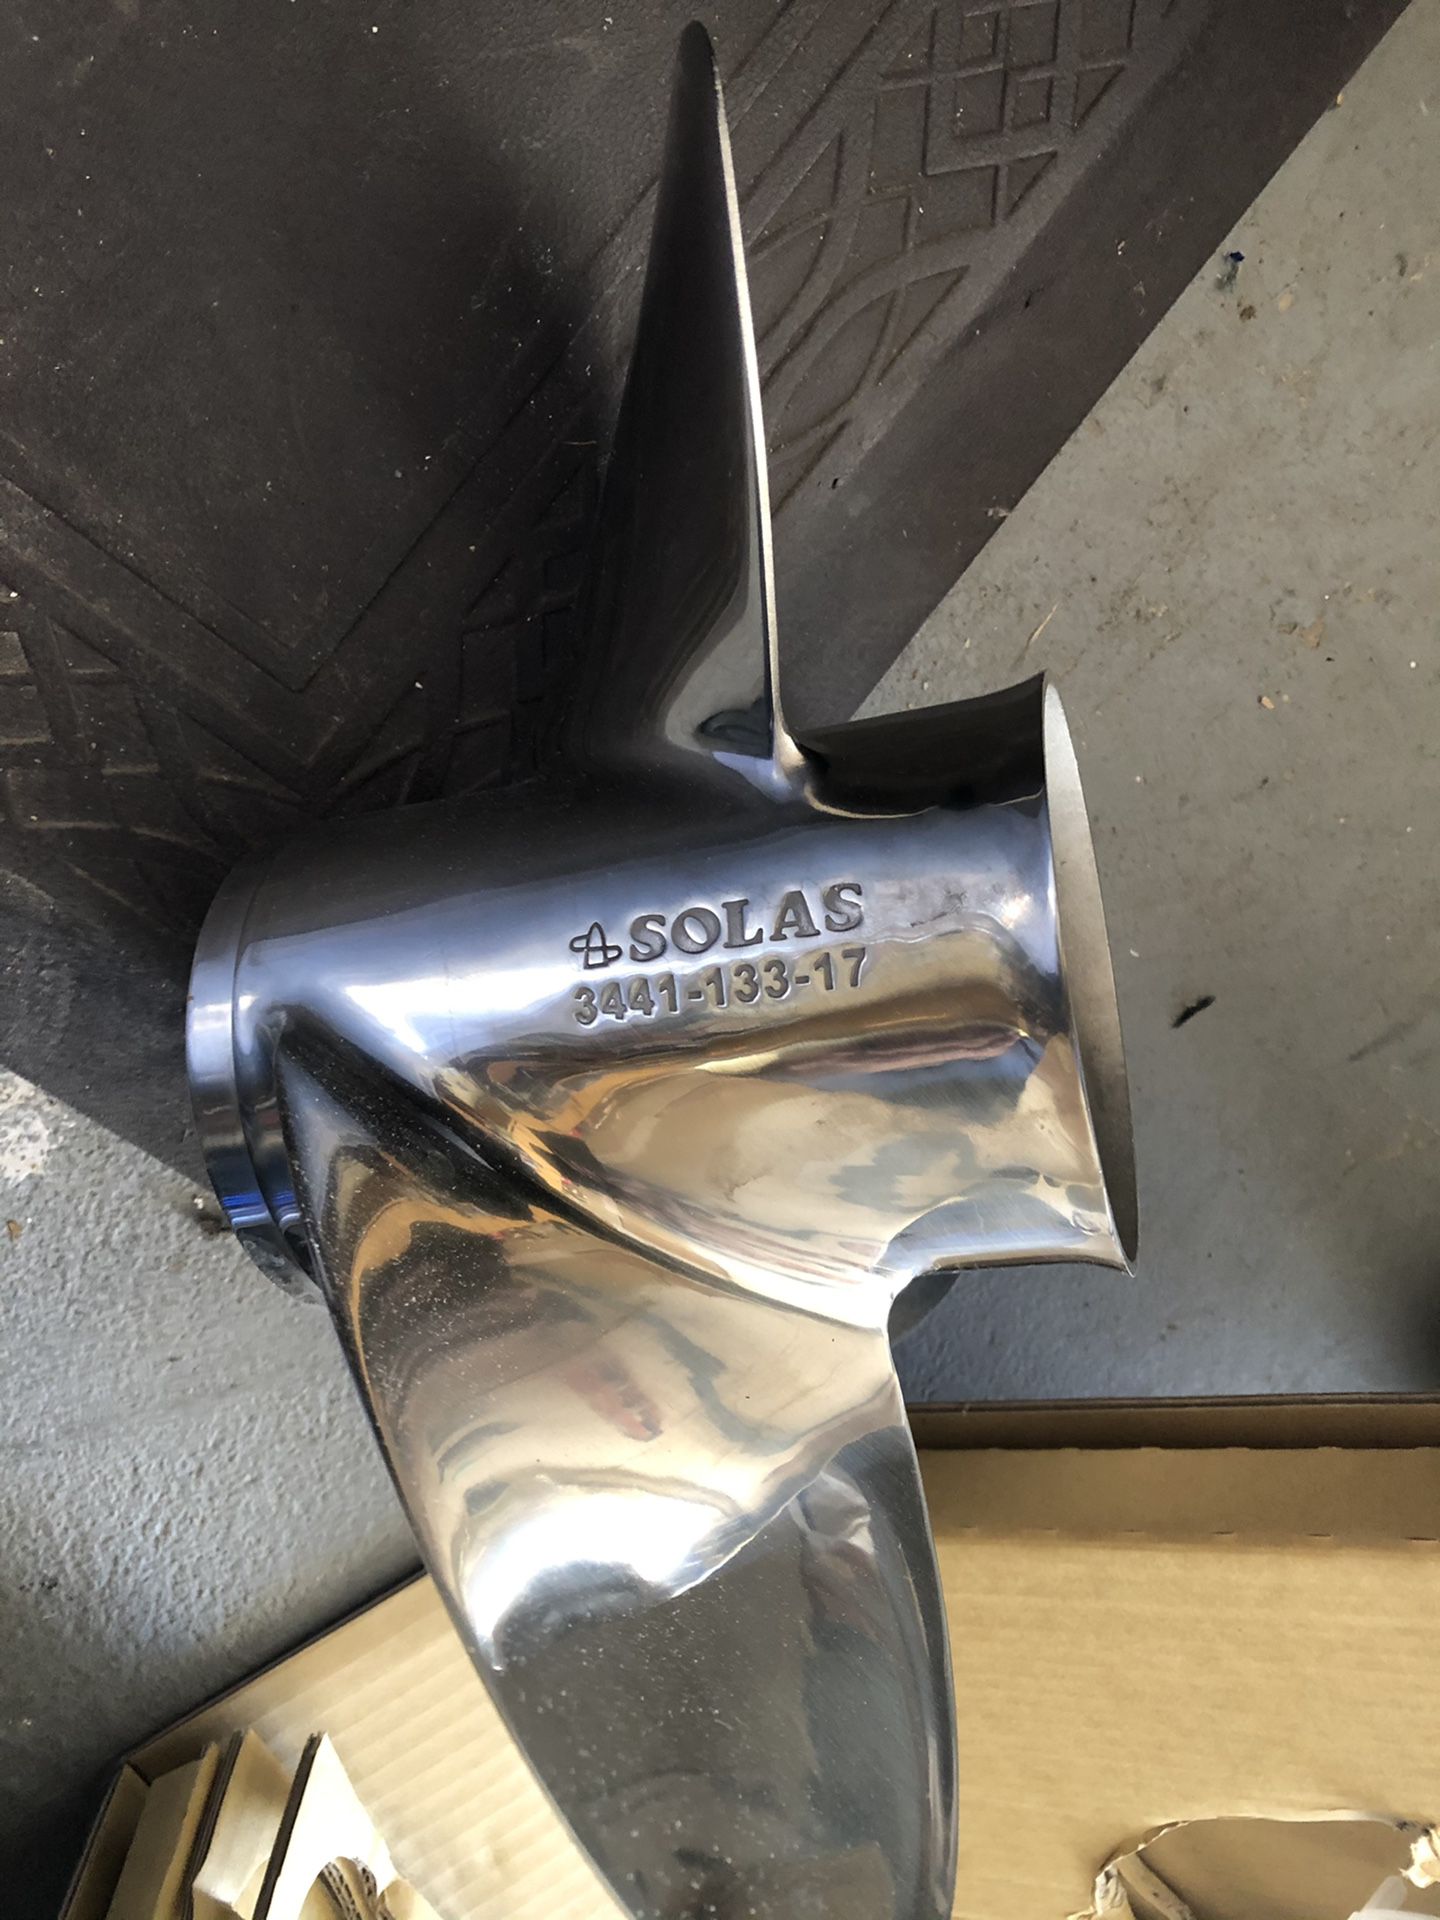 Solas prop fits Yamaha Outboards